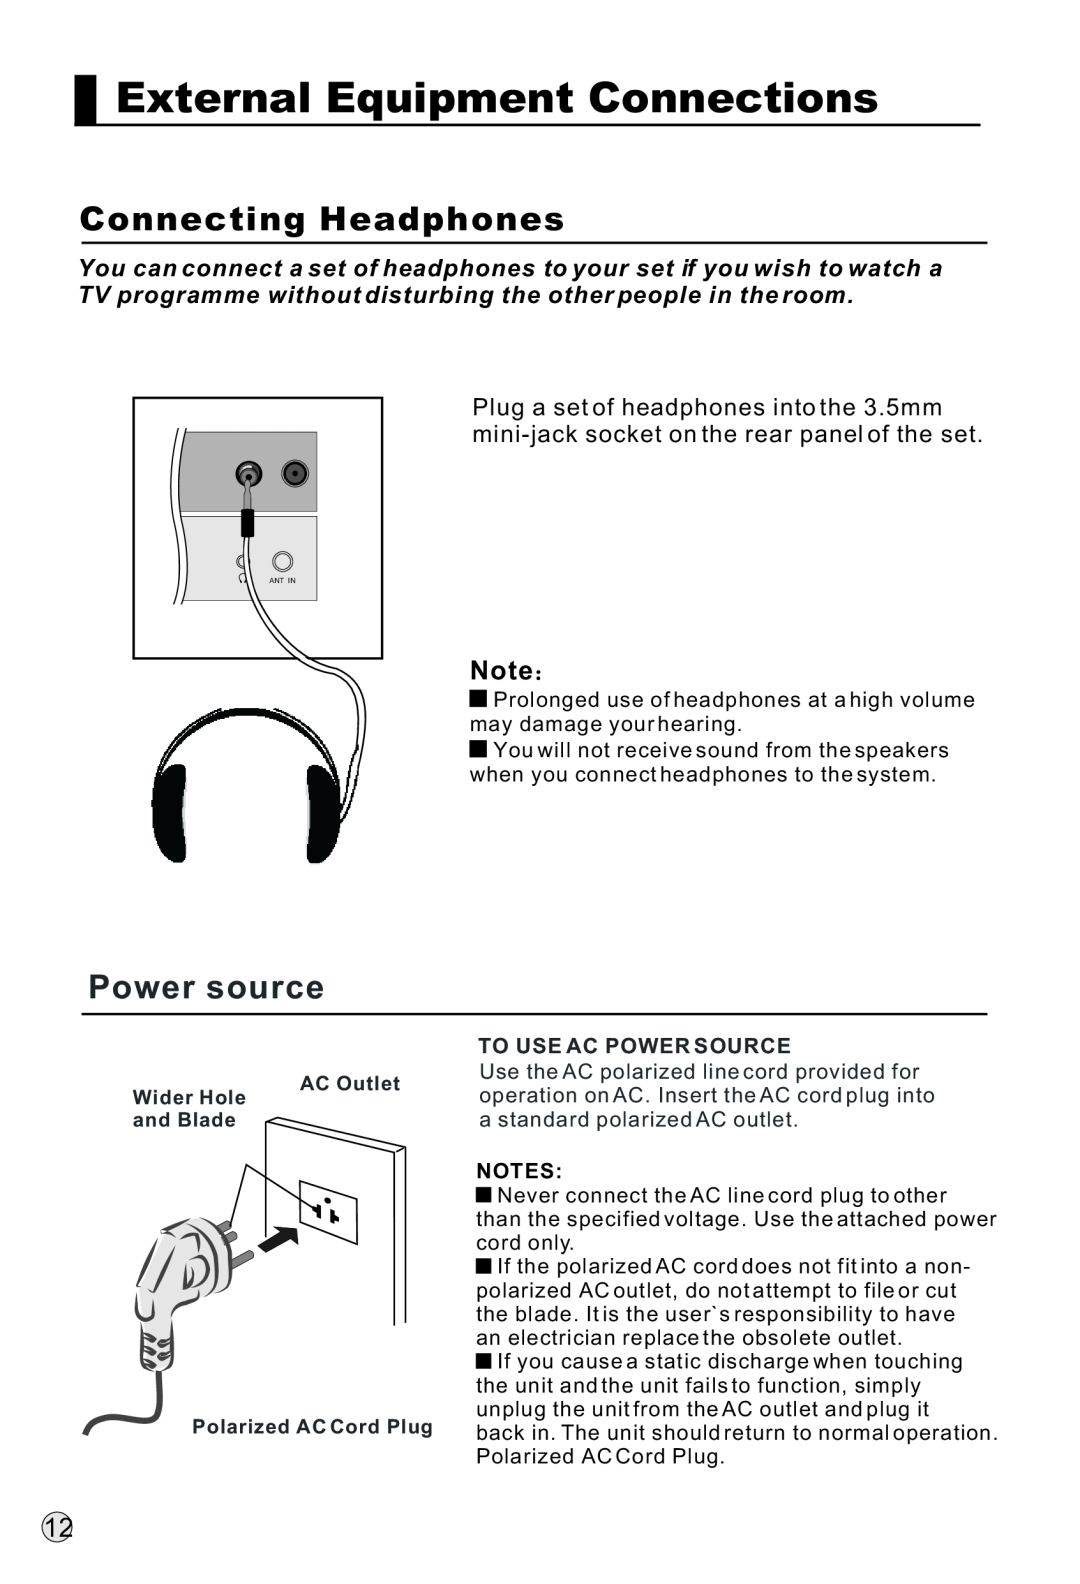 Haier L37A18-AK, L47A18-AK Connecting Headphones, Power source, External Equipment Connections, To Use Ac Power Source 